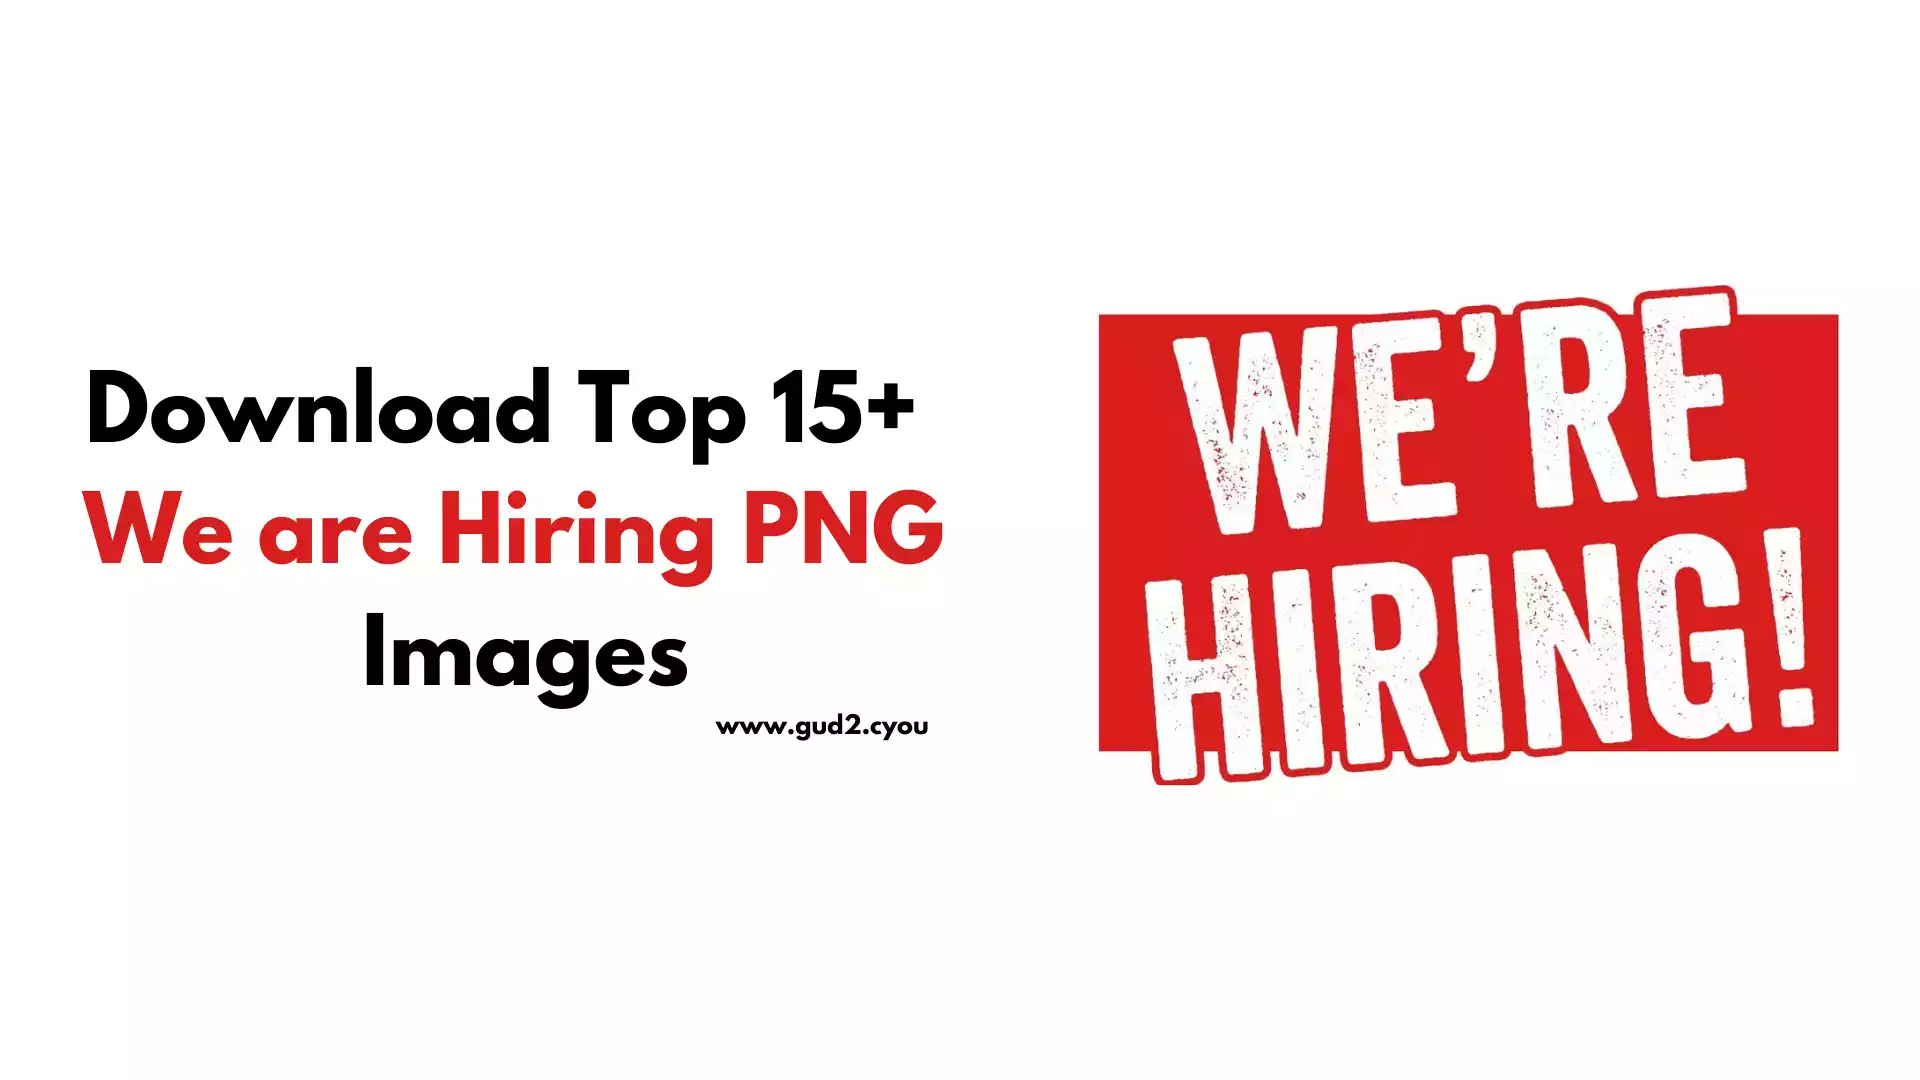 We are Hiring PNG